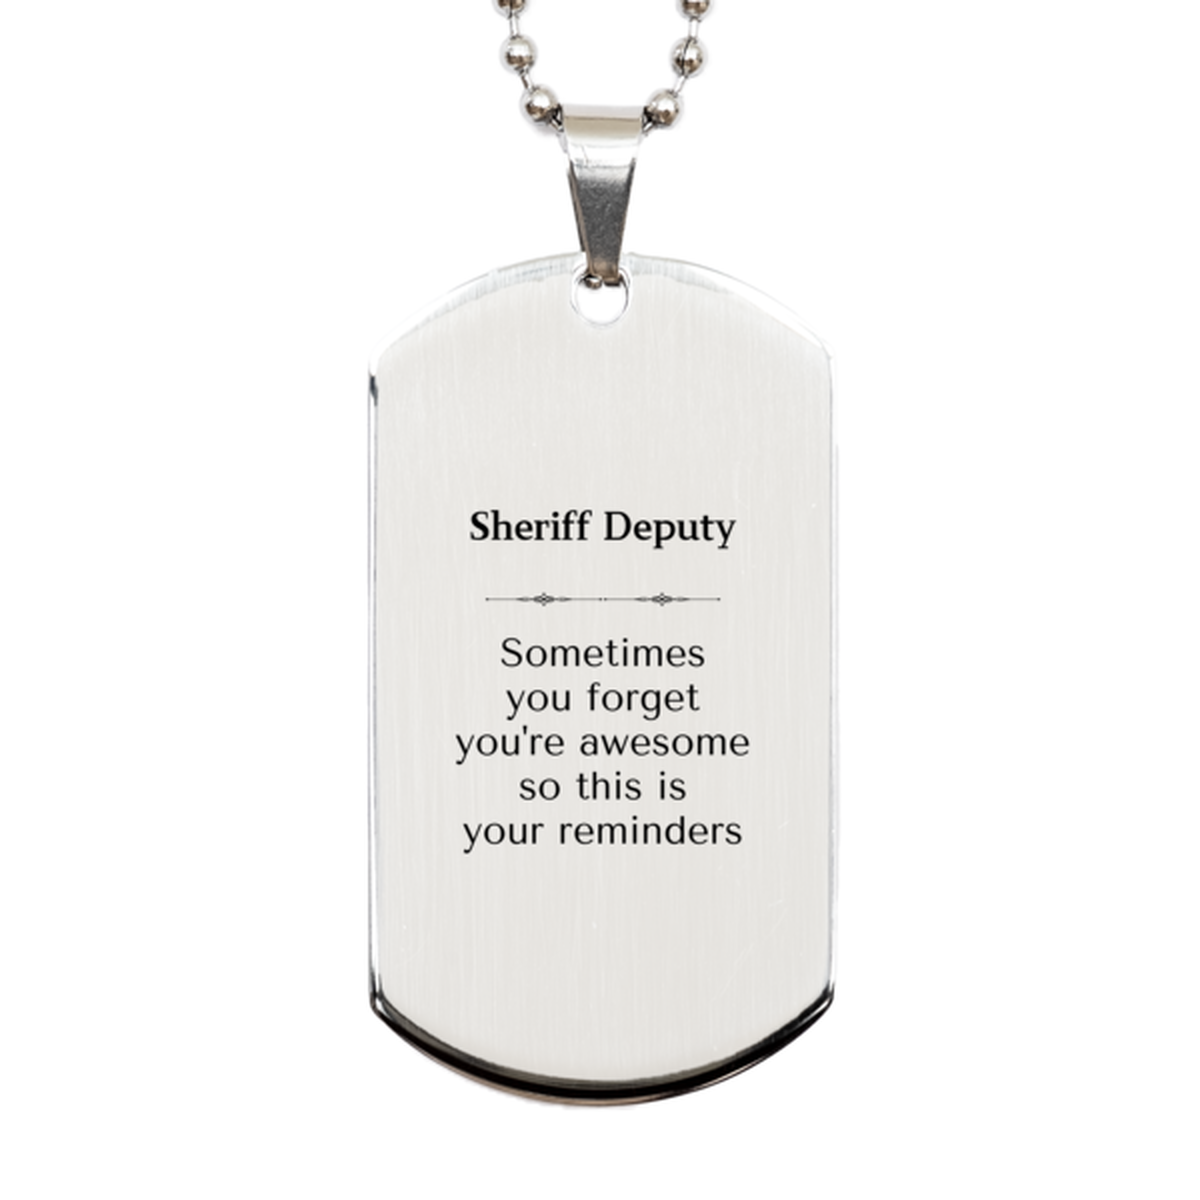 Sentimental Sheriff Deputy Silver Dog Tag, Sheriff Deputy Sometimes you forget you're awesome so this is your reminders, Graduation Christmas Birthday Gifts for Sheriff Deputy, Men, Women, Coworkers